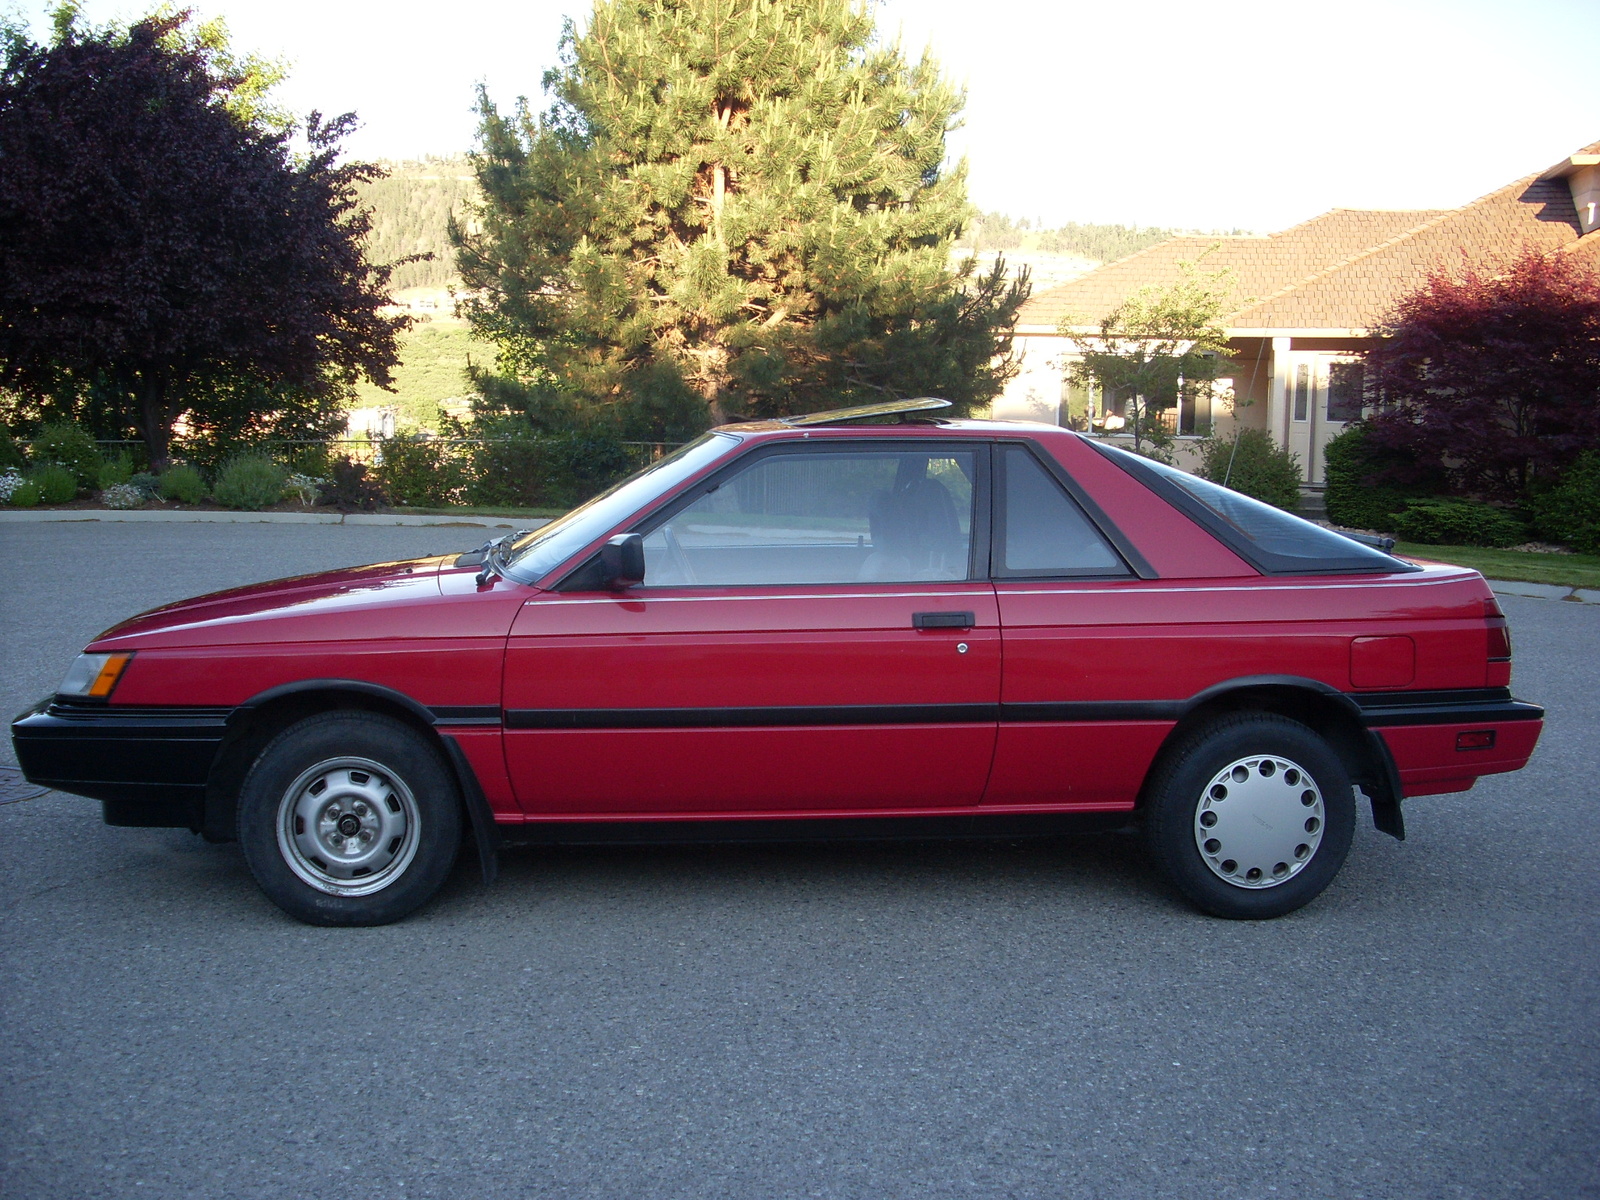 1989 Nissan sentra picture #6